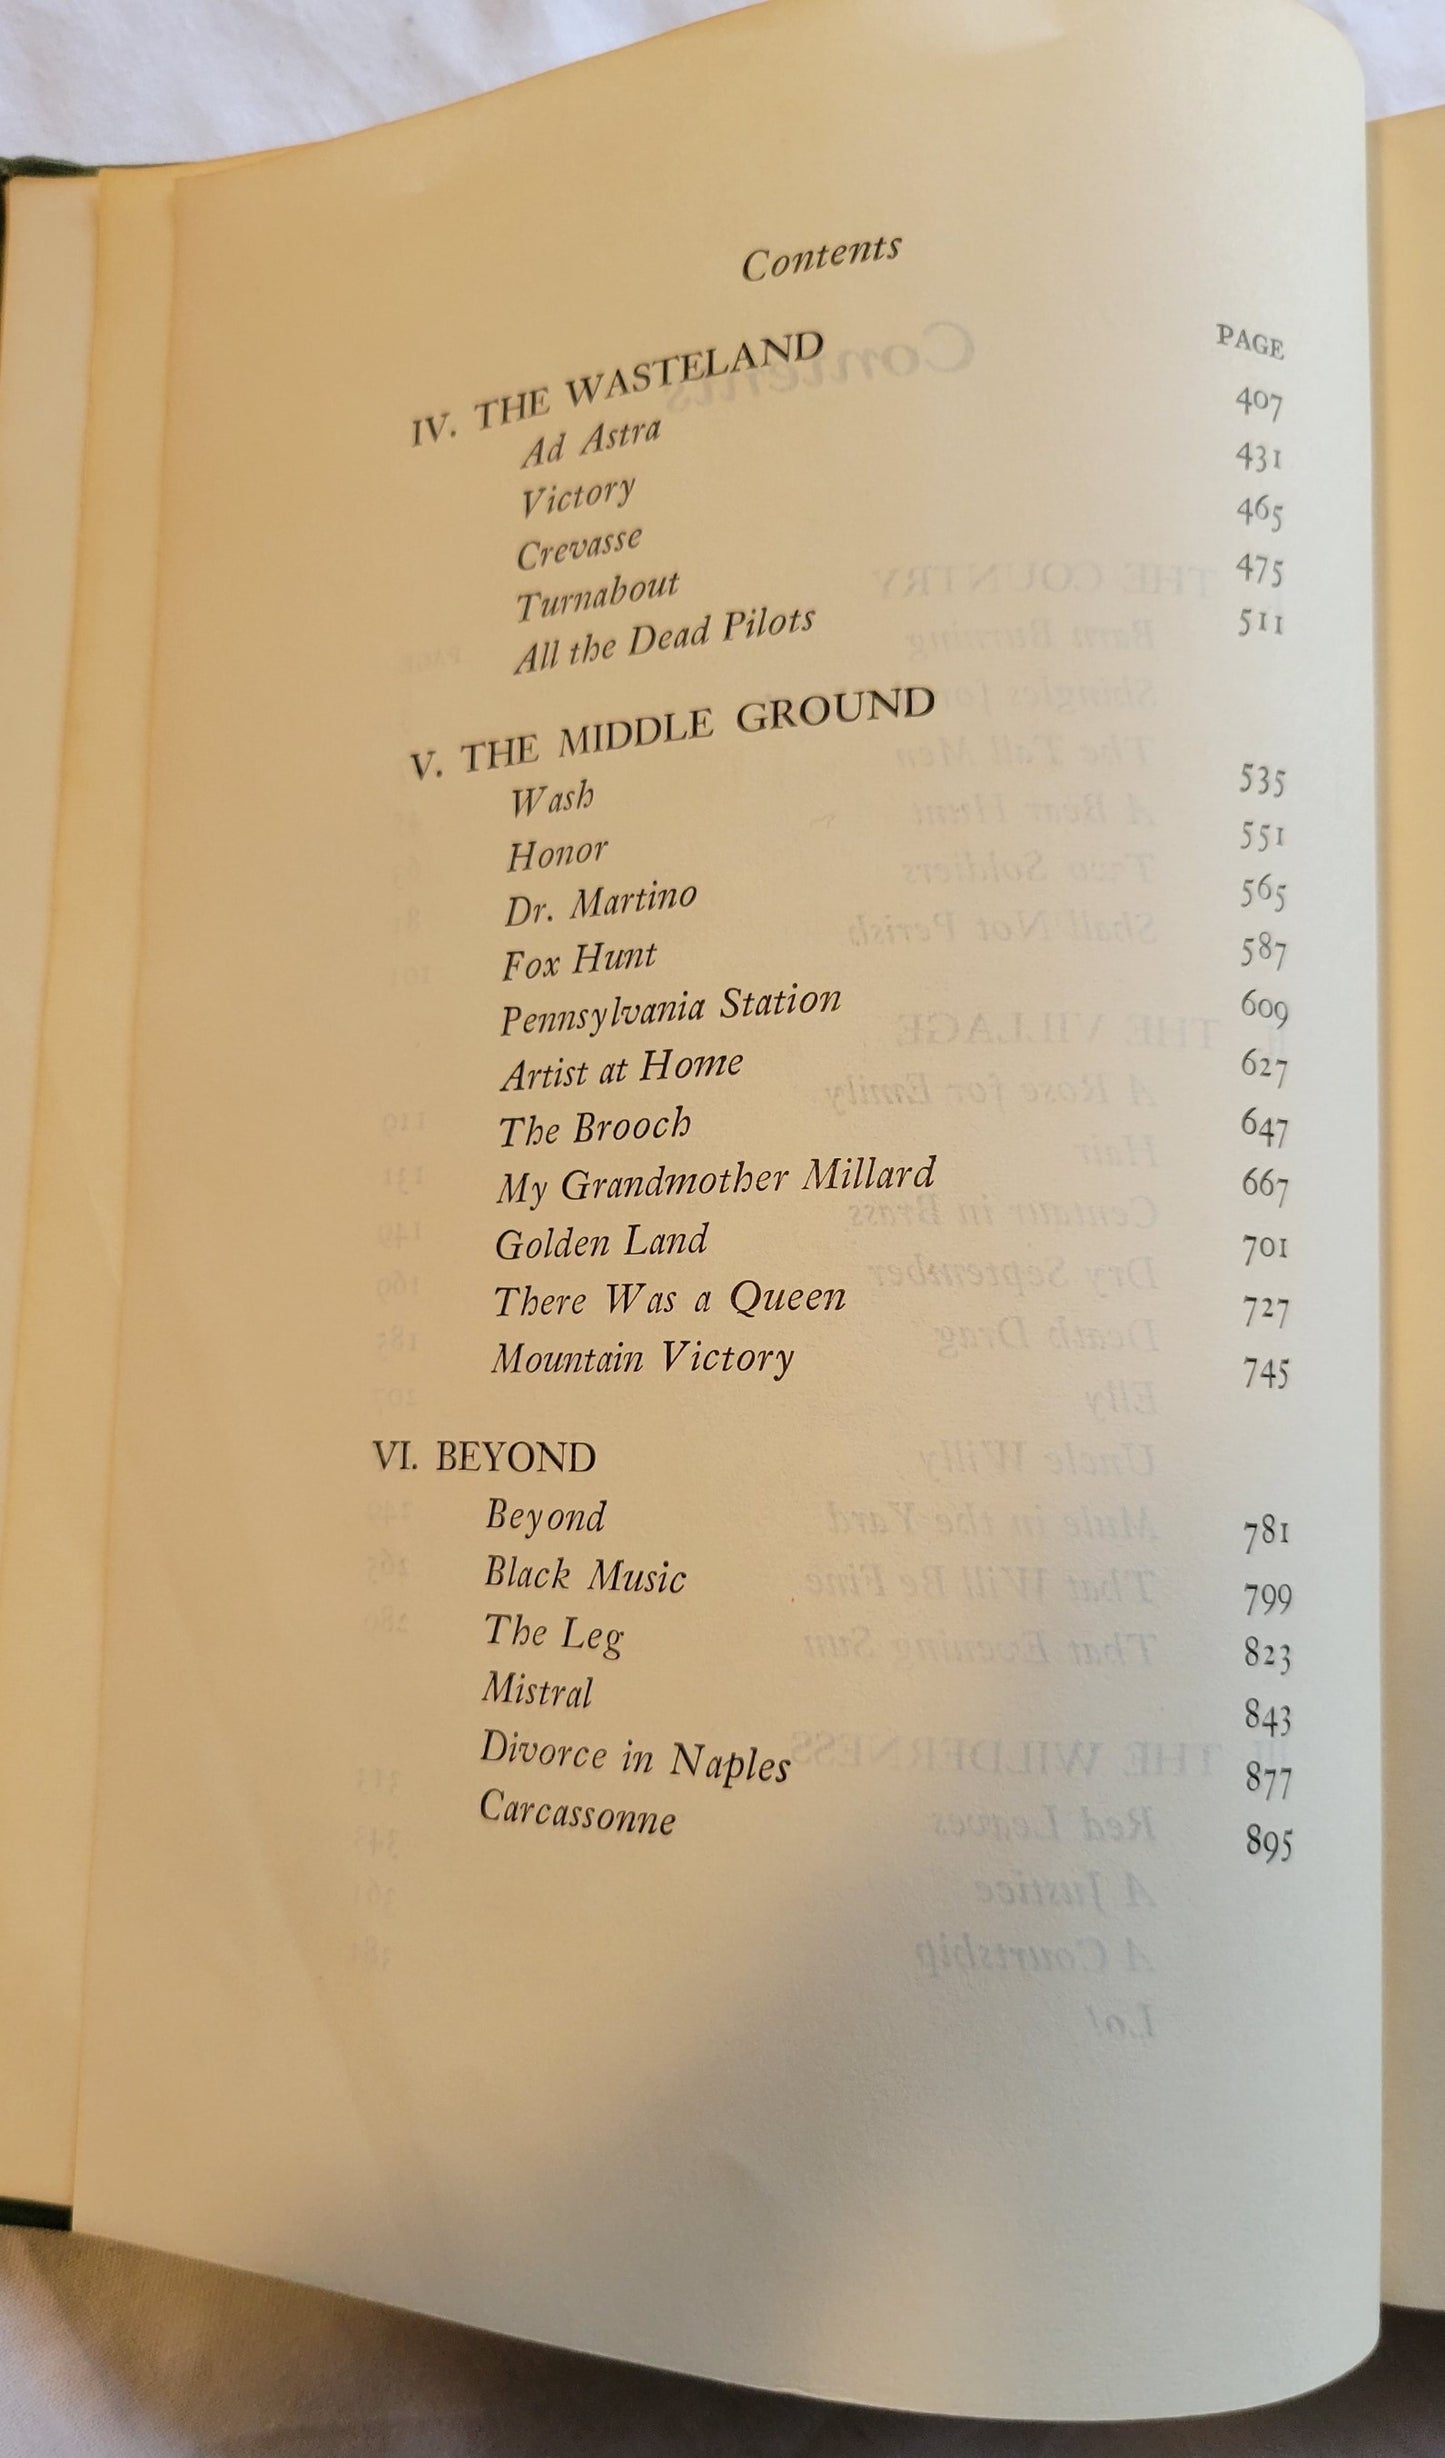 Vintage book. "Collected Stories" by William Faulkner, published by Random House. View of table of contents.